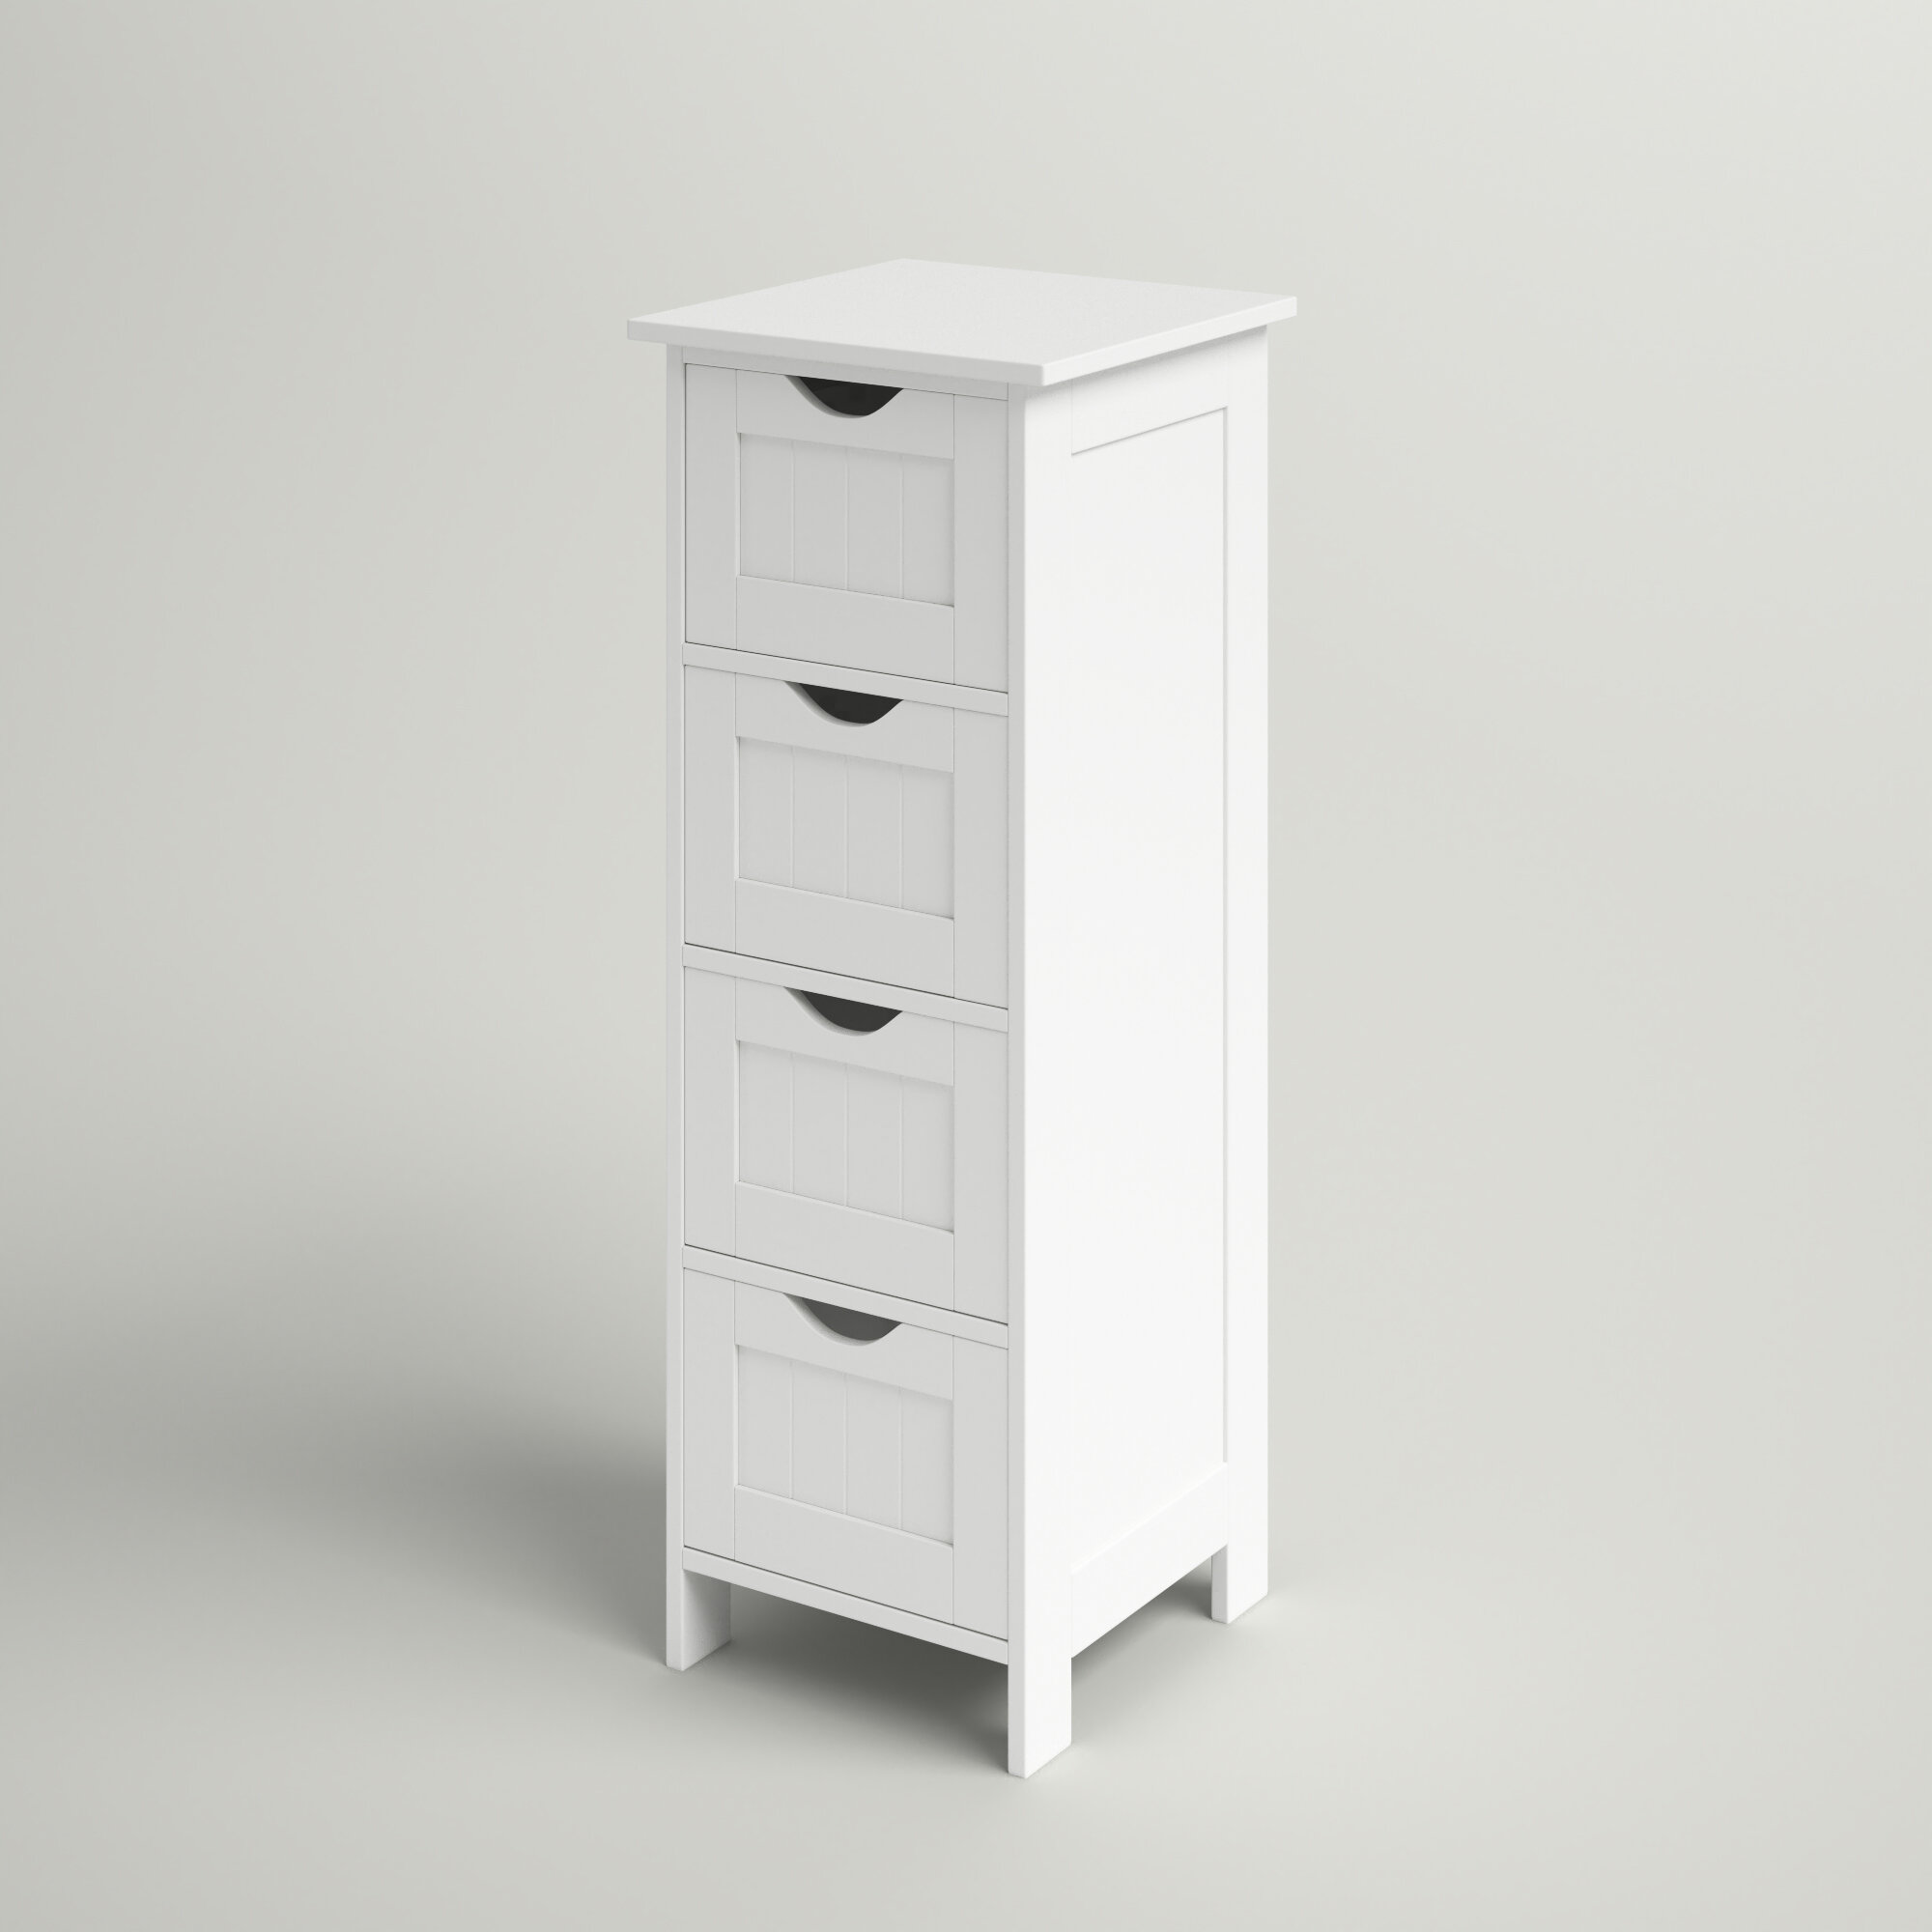 Floor Standing Cabinet White Wood Colour Chrome Handles Attractive Good Quality 